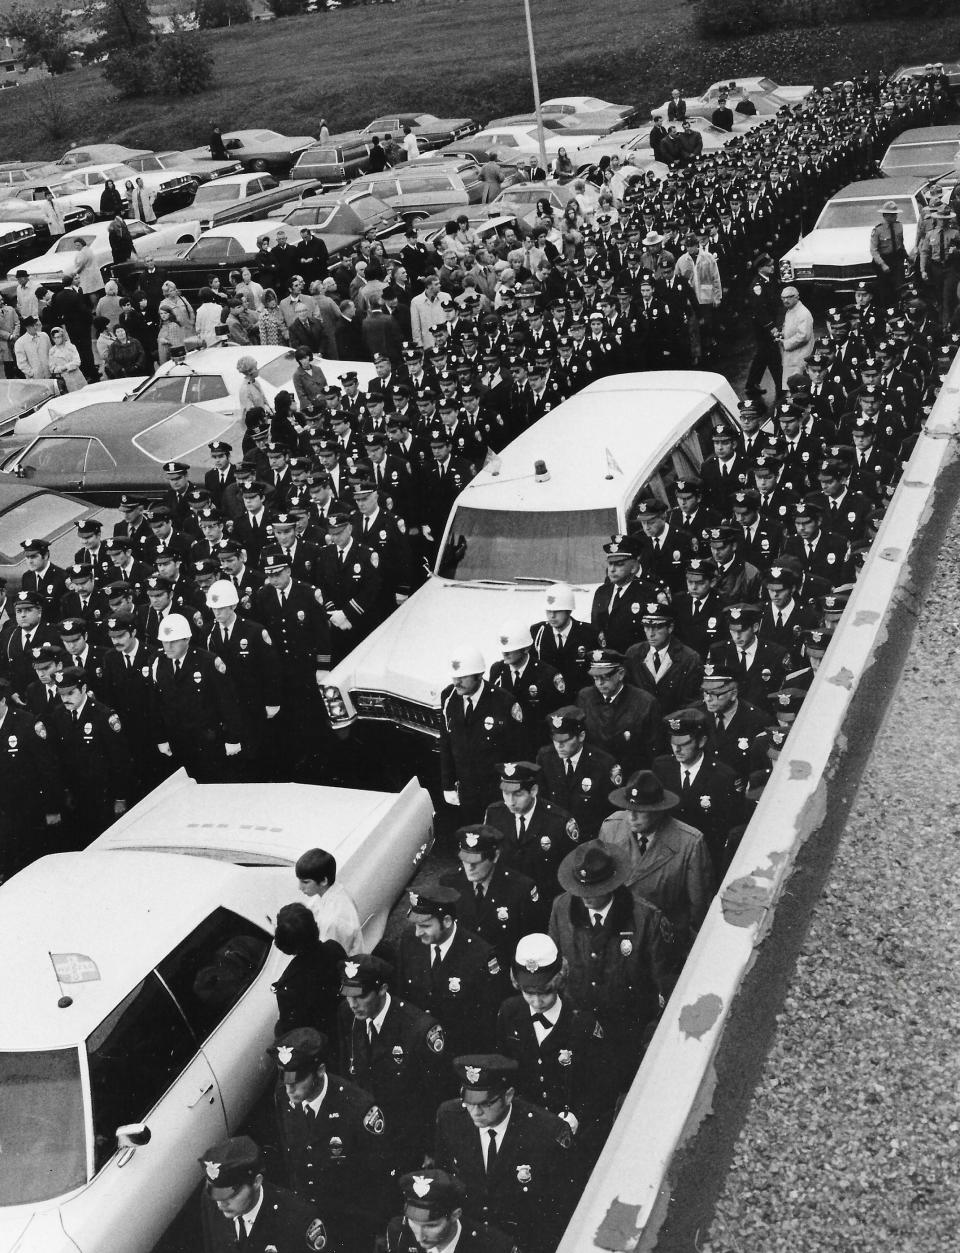 Officers pay their respects at the funeral of Akron Patrolman Stephen J. Ondas in 1972.